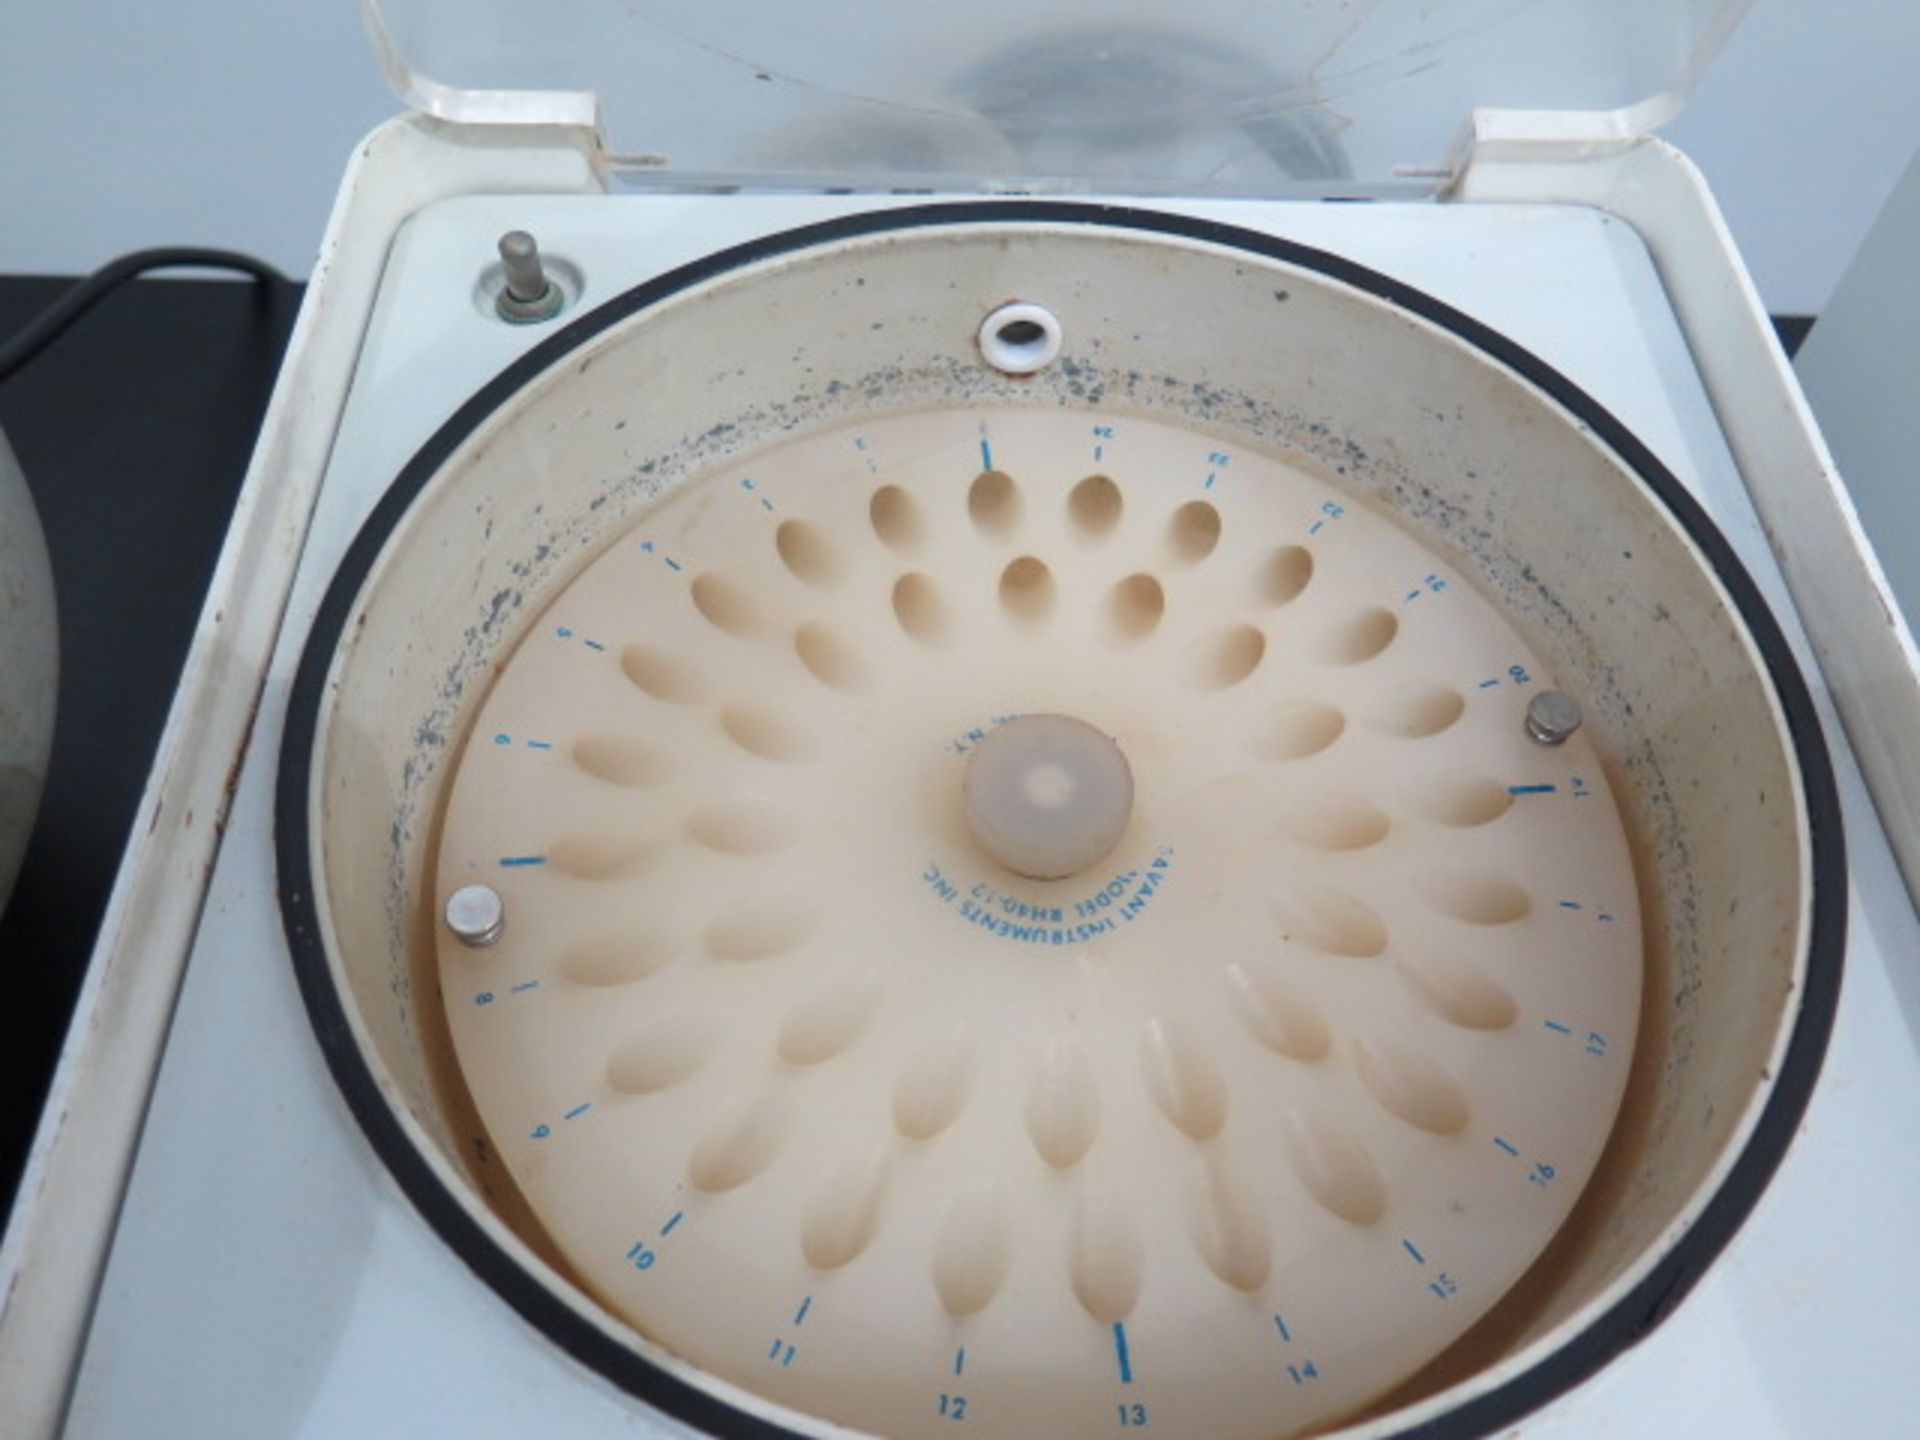 Savant "Speed Vac Concentrator" Vacuum Centrifuge (SOLD AS-IS - NO WARRANTY) - Image 3 of 6